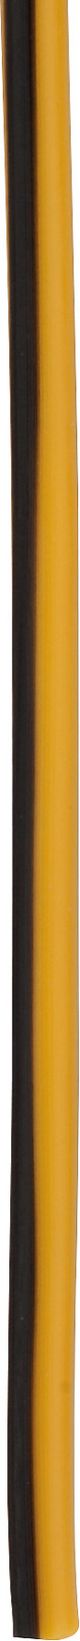 CABLE, 1 meter 0.75qmm yellow-black (yellow cable with black line)